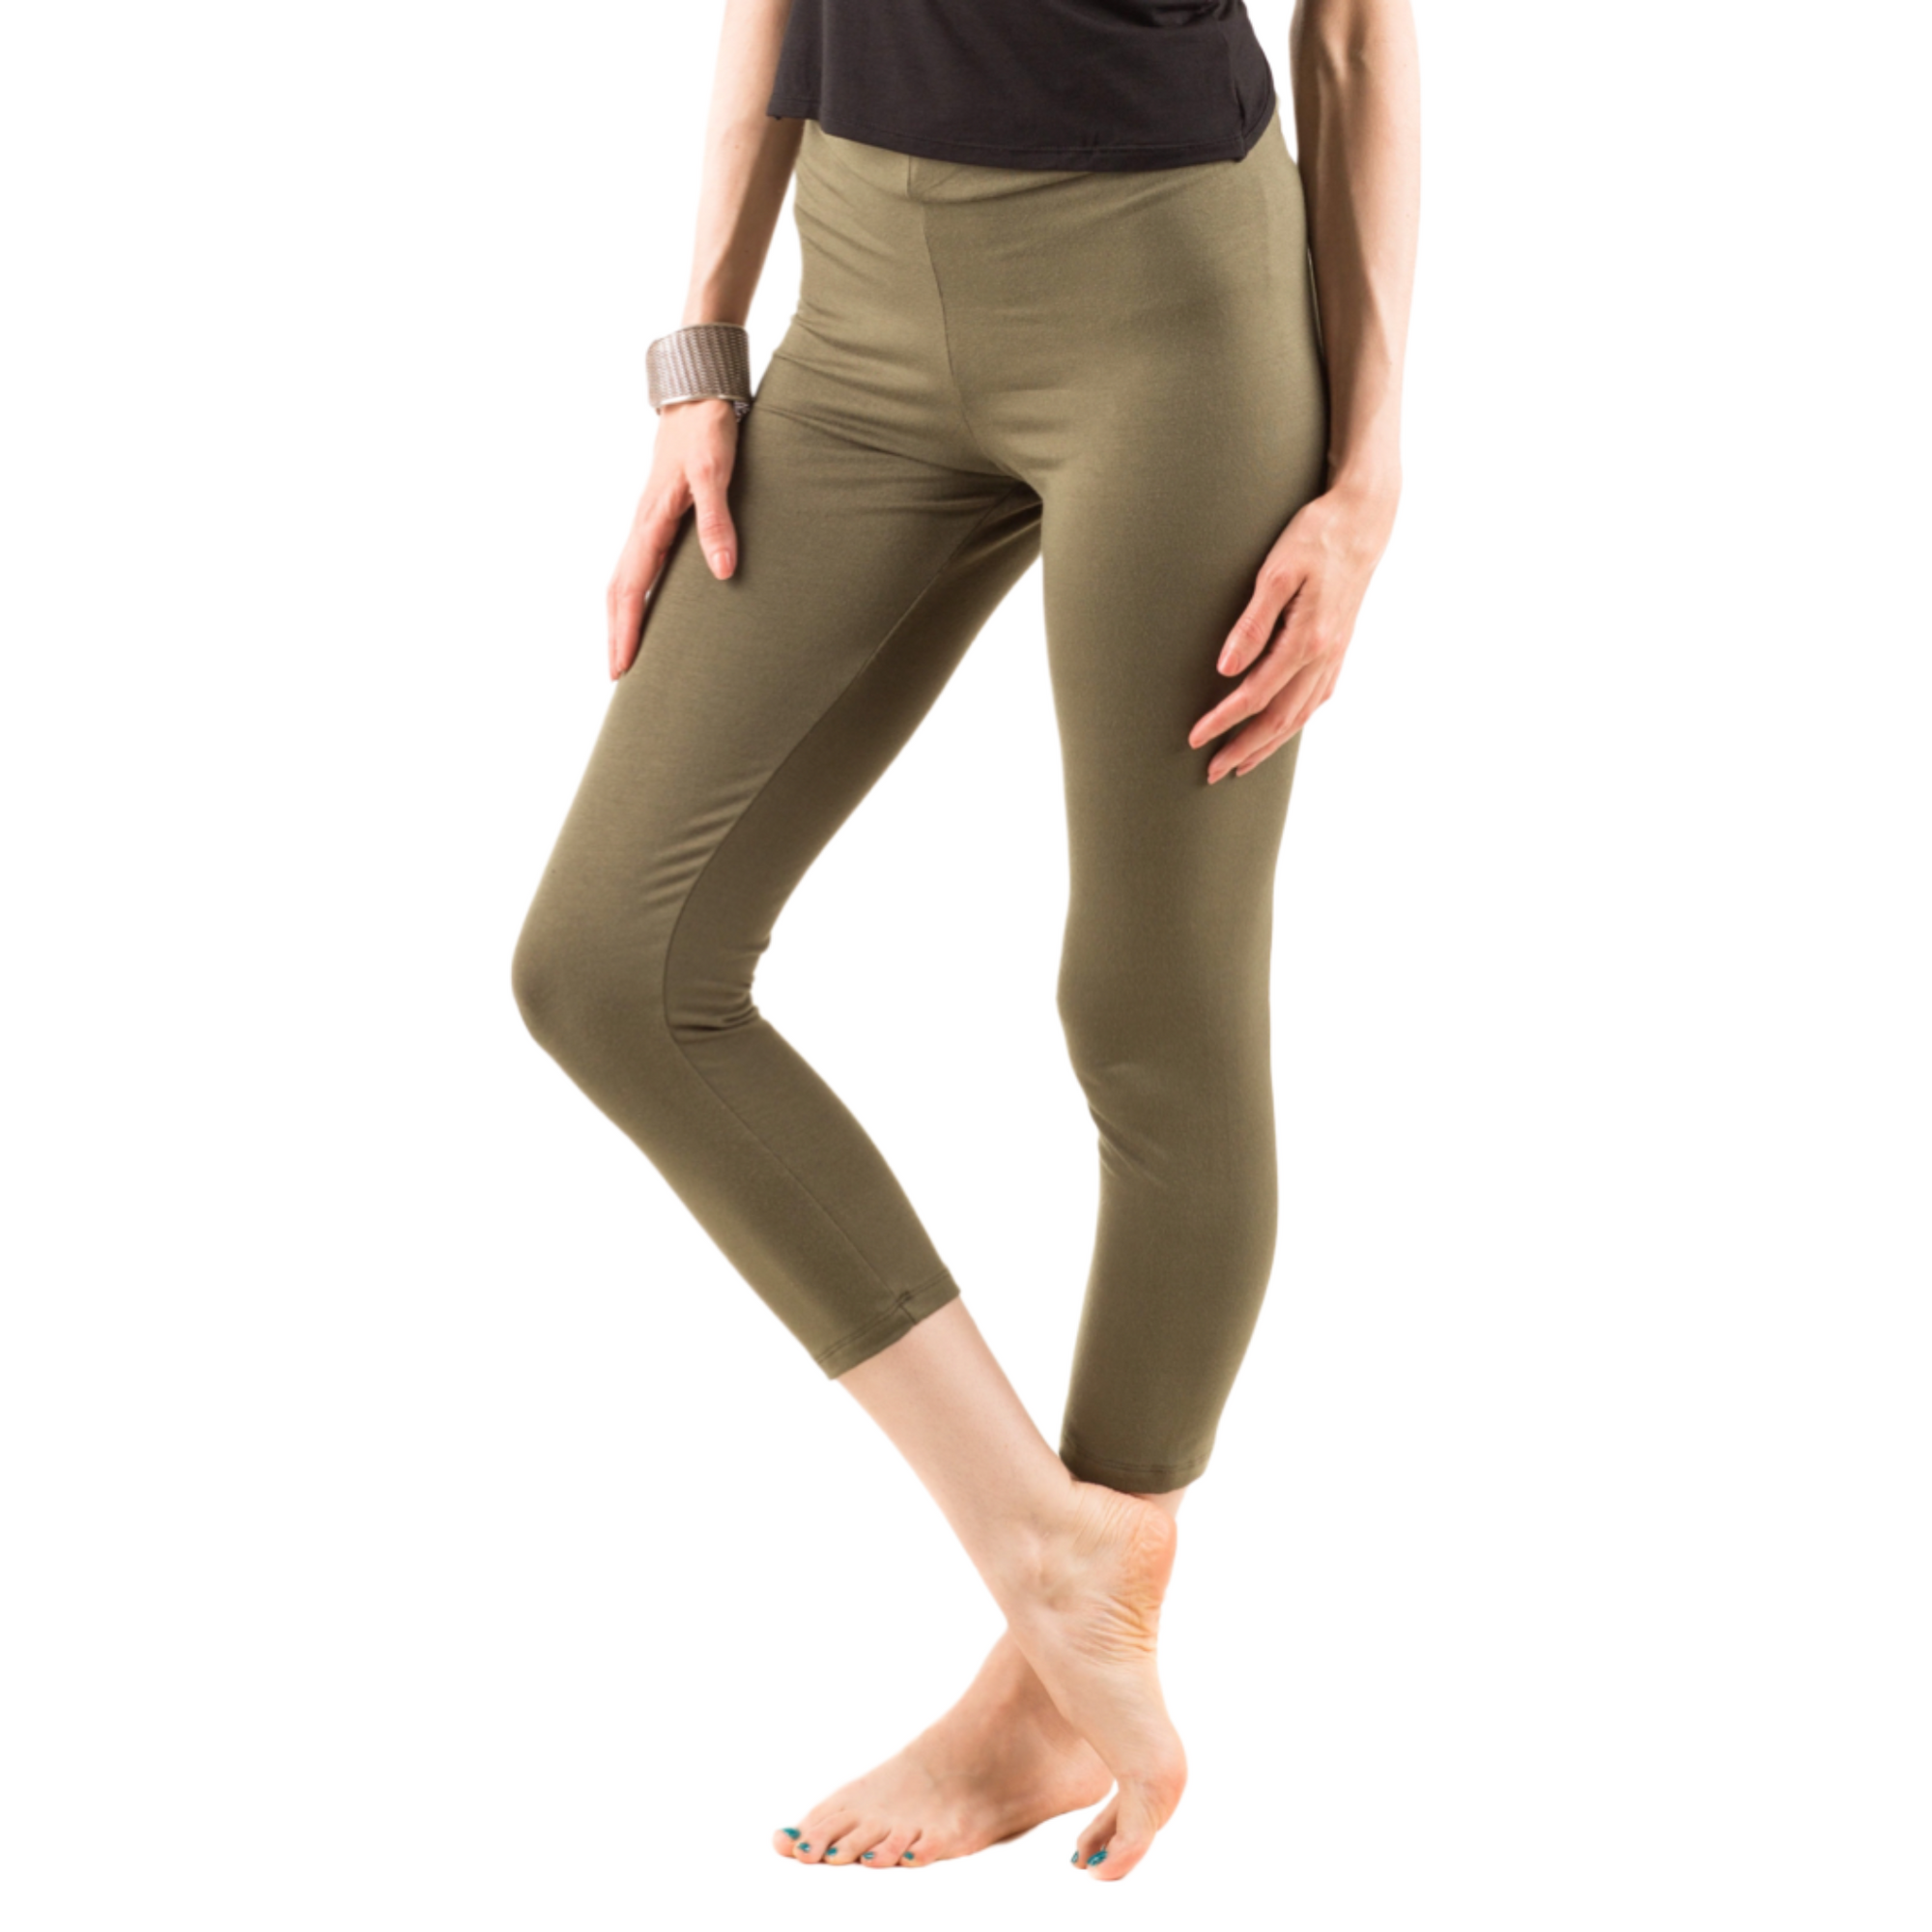 Women's Tall Clothing Online | Tall Pants, Jeans, Leggings | Go Colors